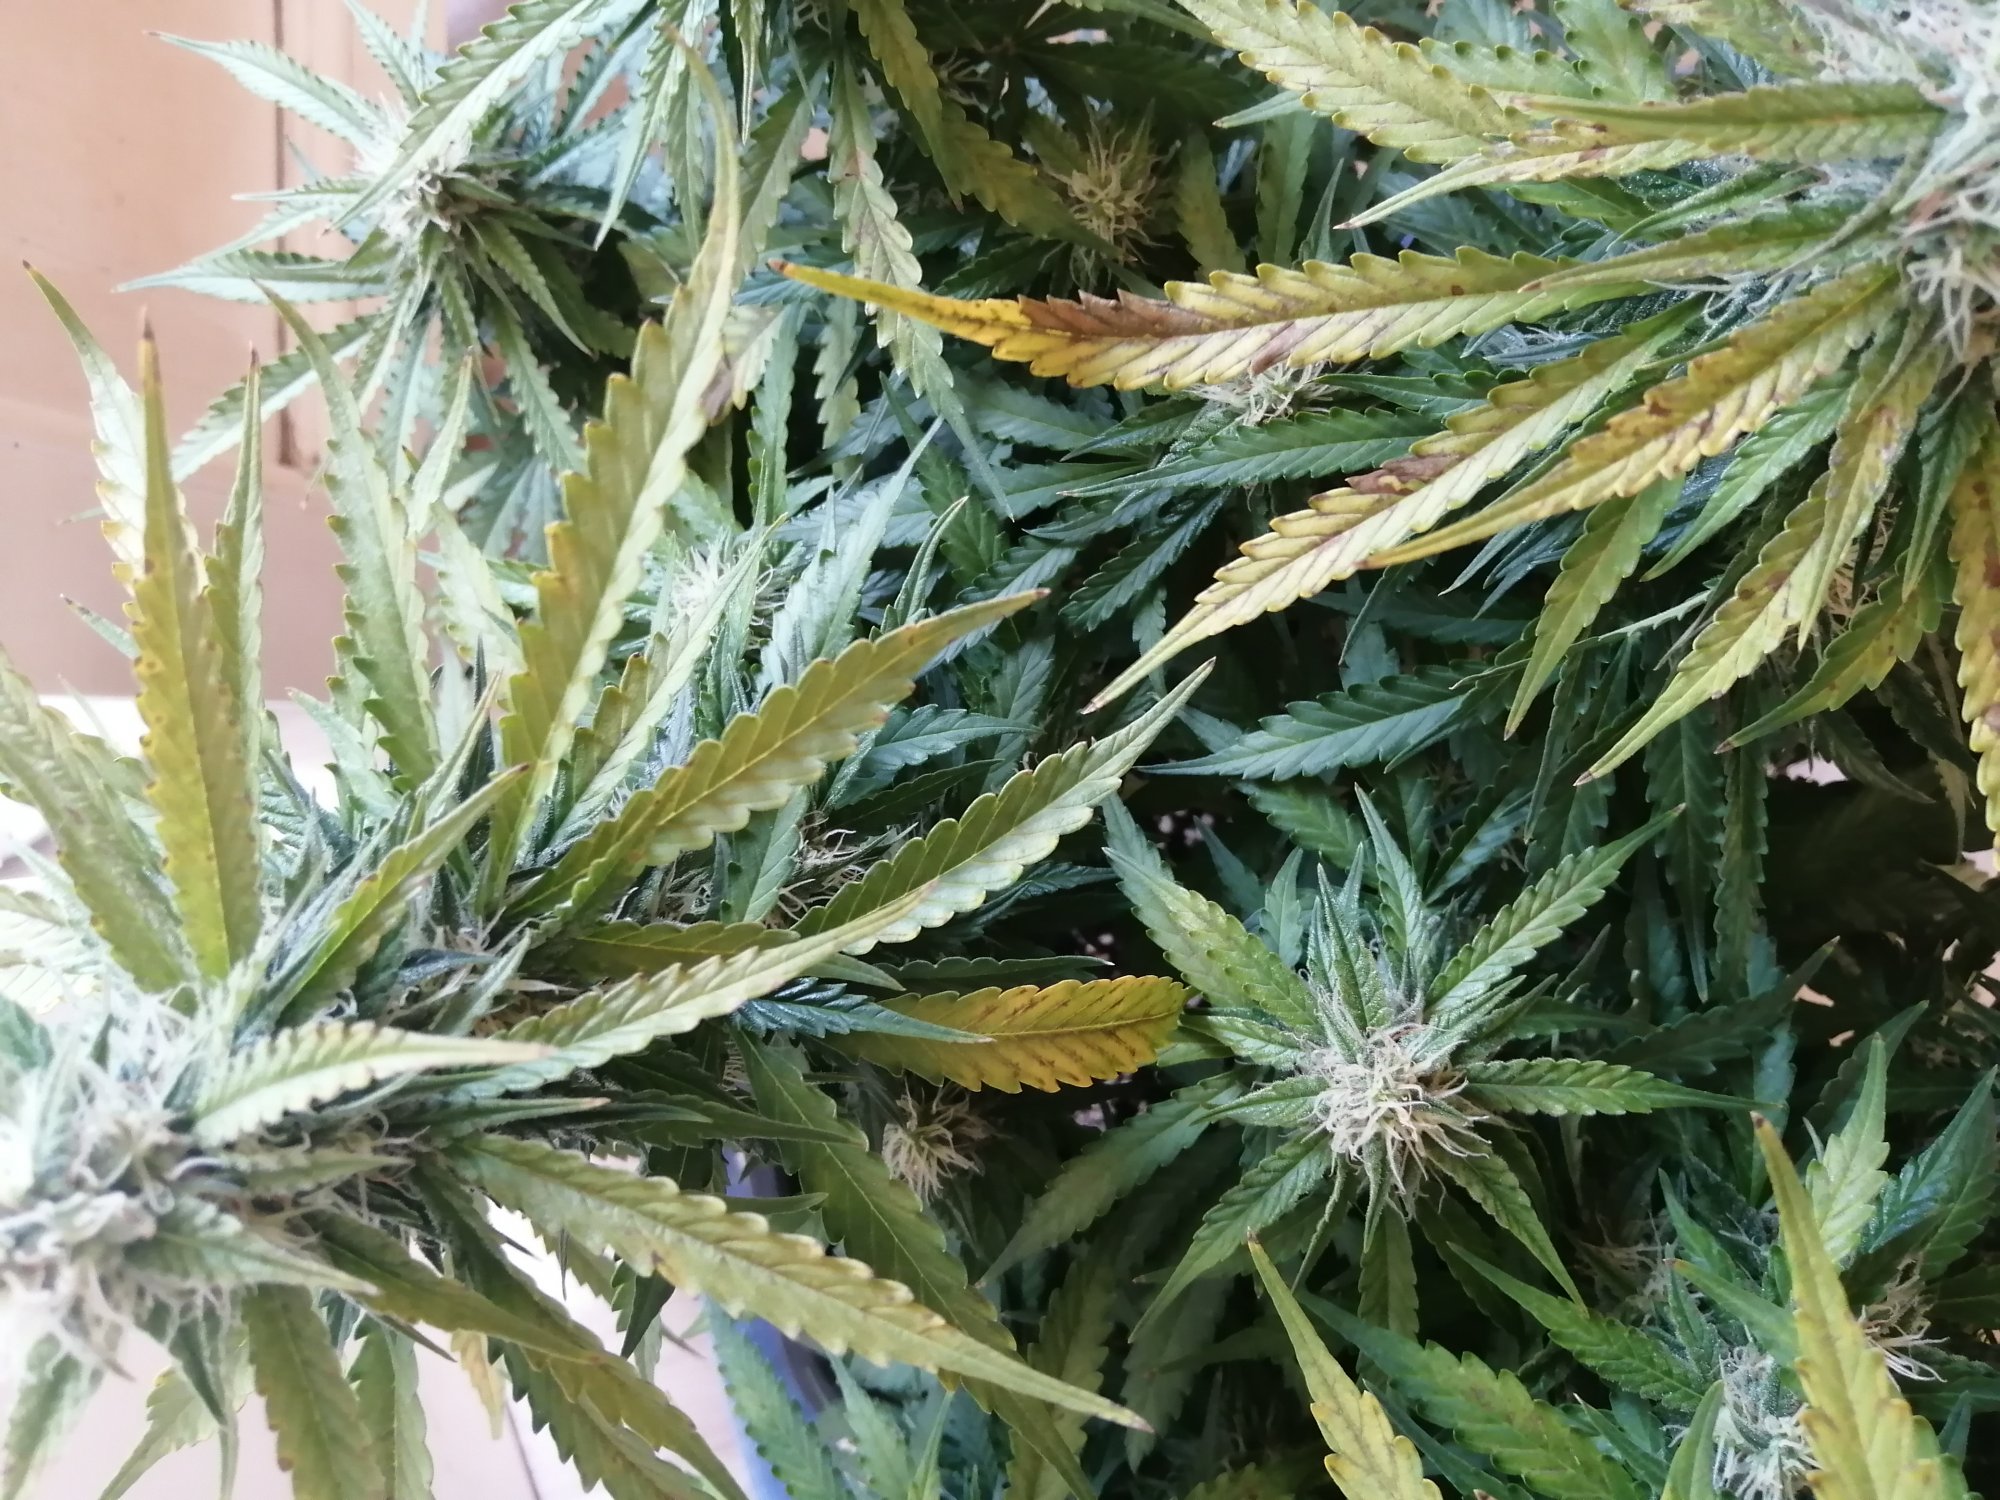 Urgent help needed is this calcium deficiency or lockout or anything else 2